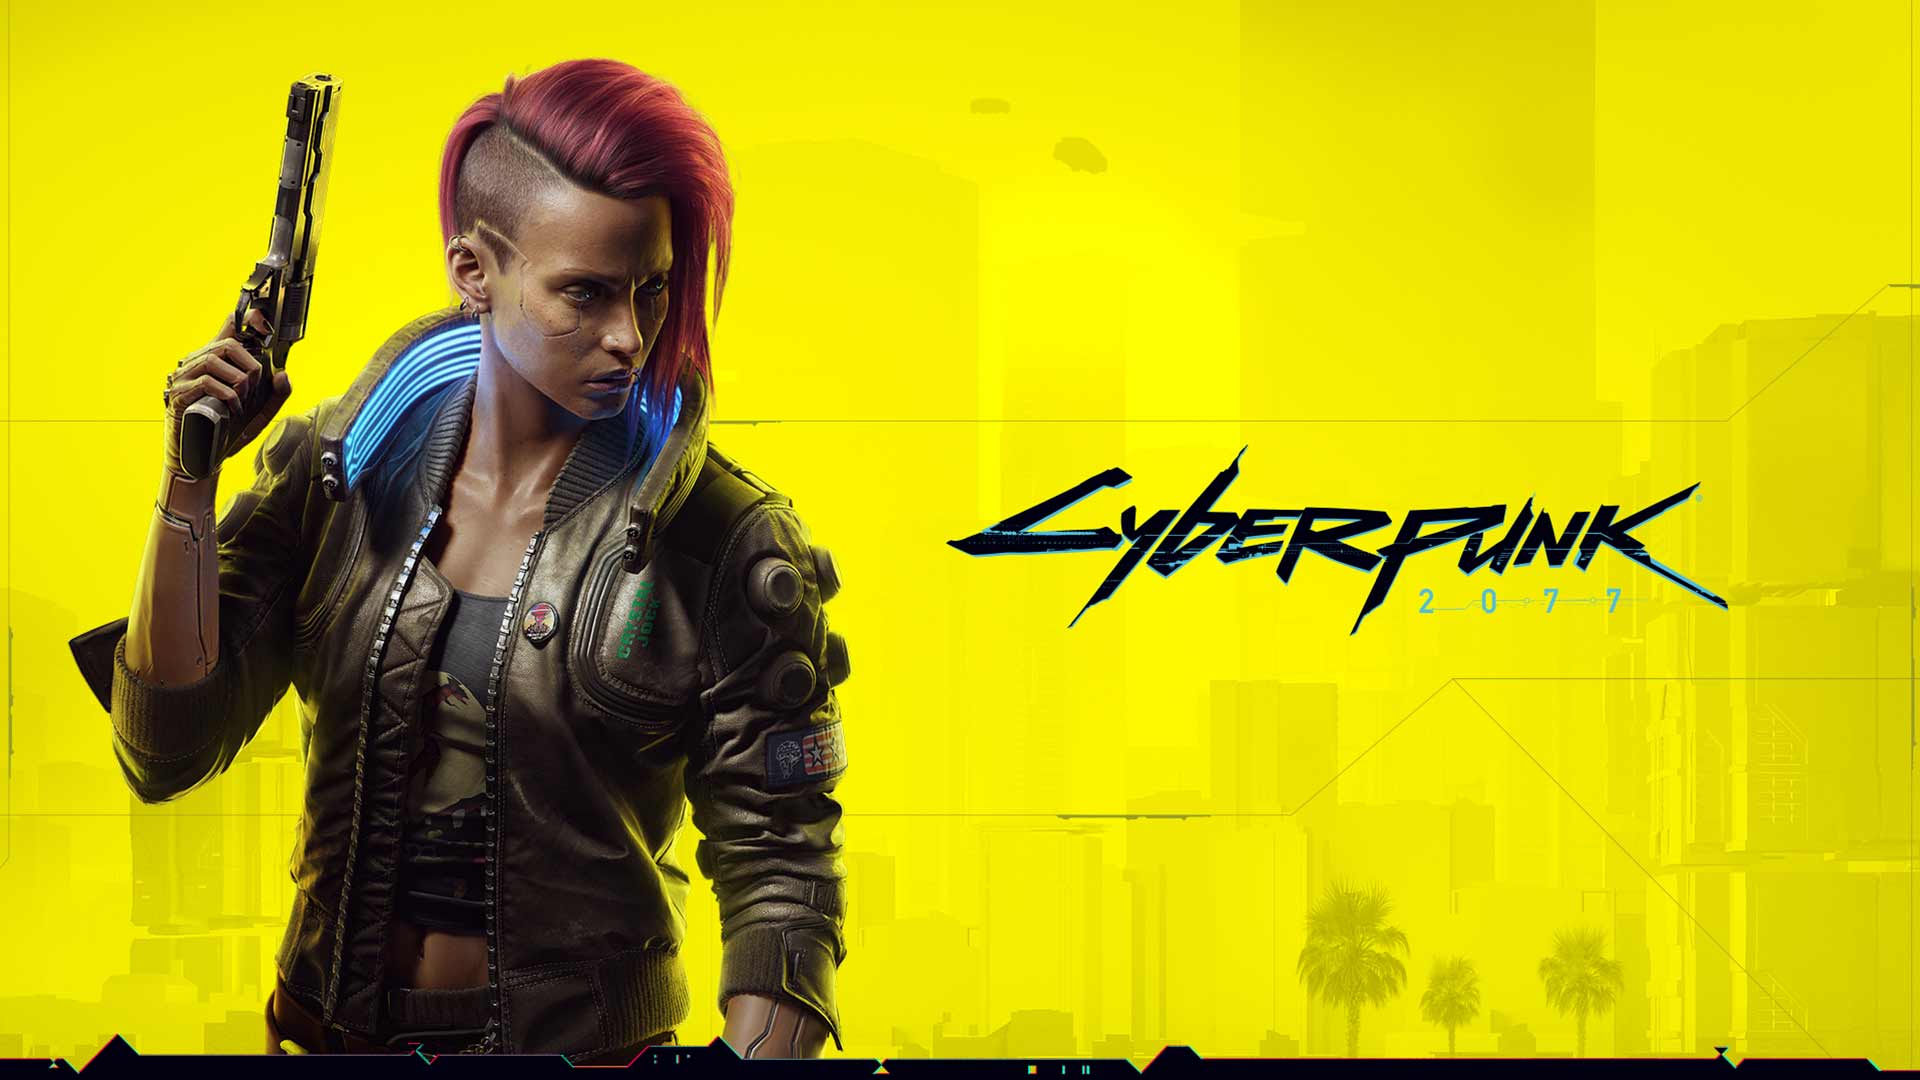 Cyberpunk 2077 PC game requirements in detail